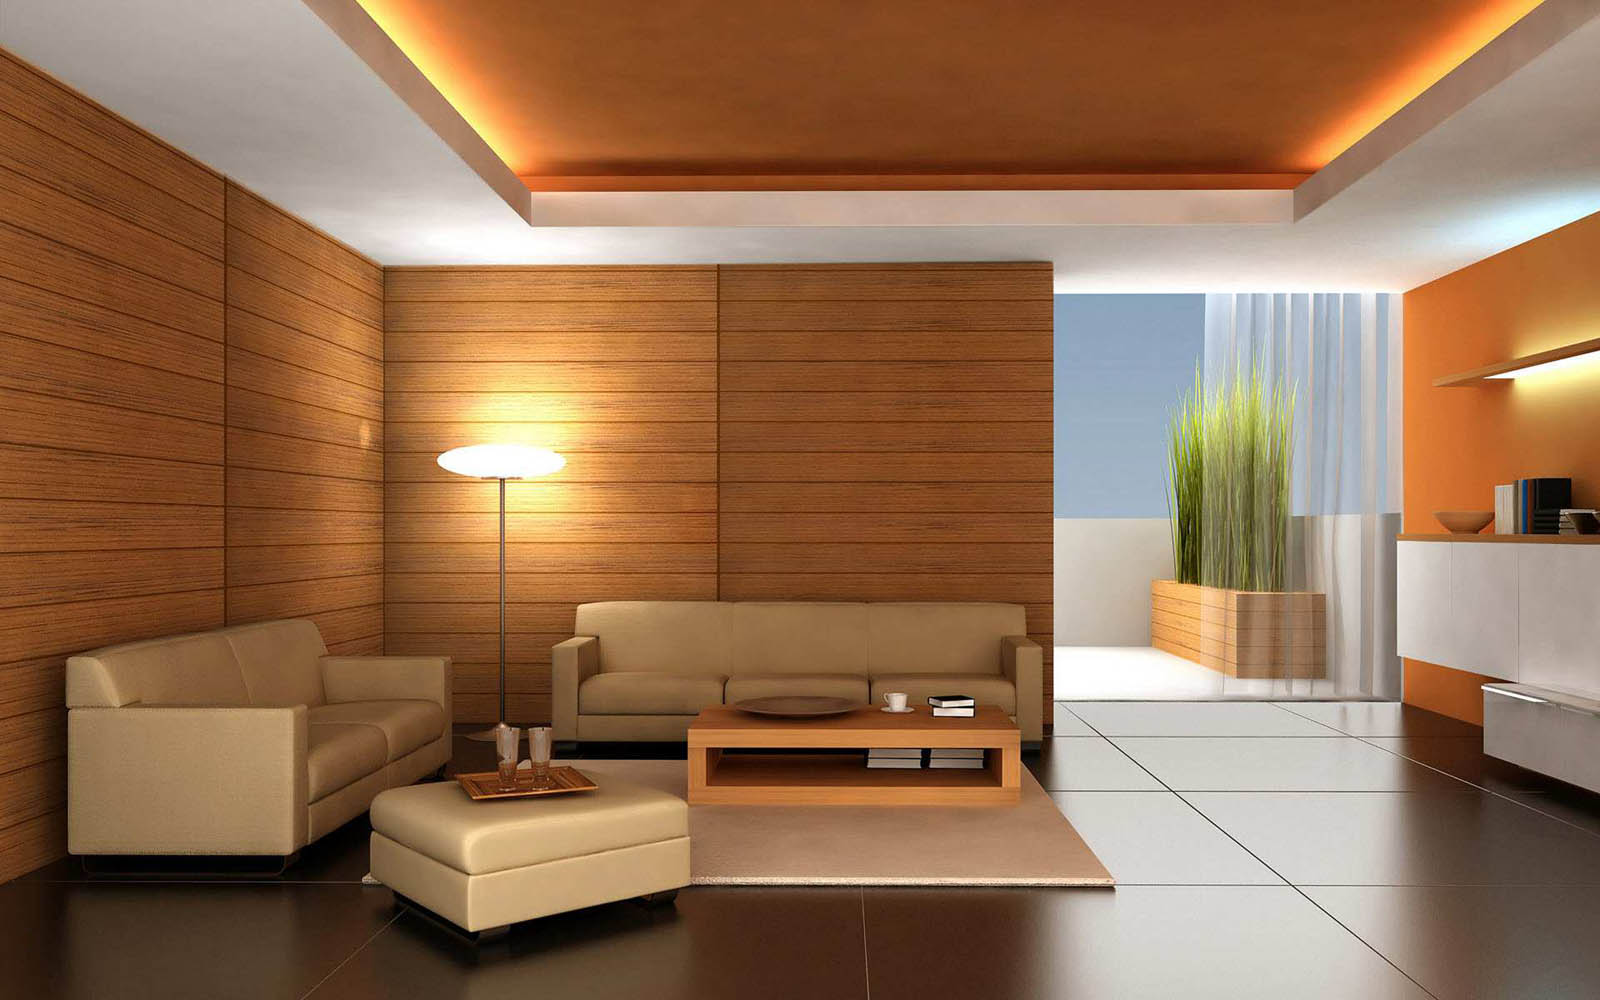 Tag Modern Living Room Photos Wallpapers Backgrounds Images and 1600x1000